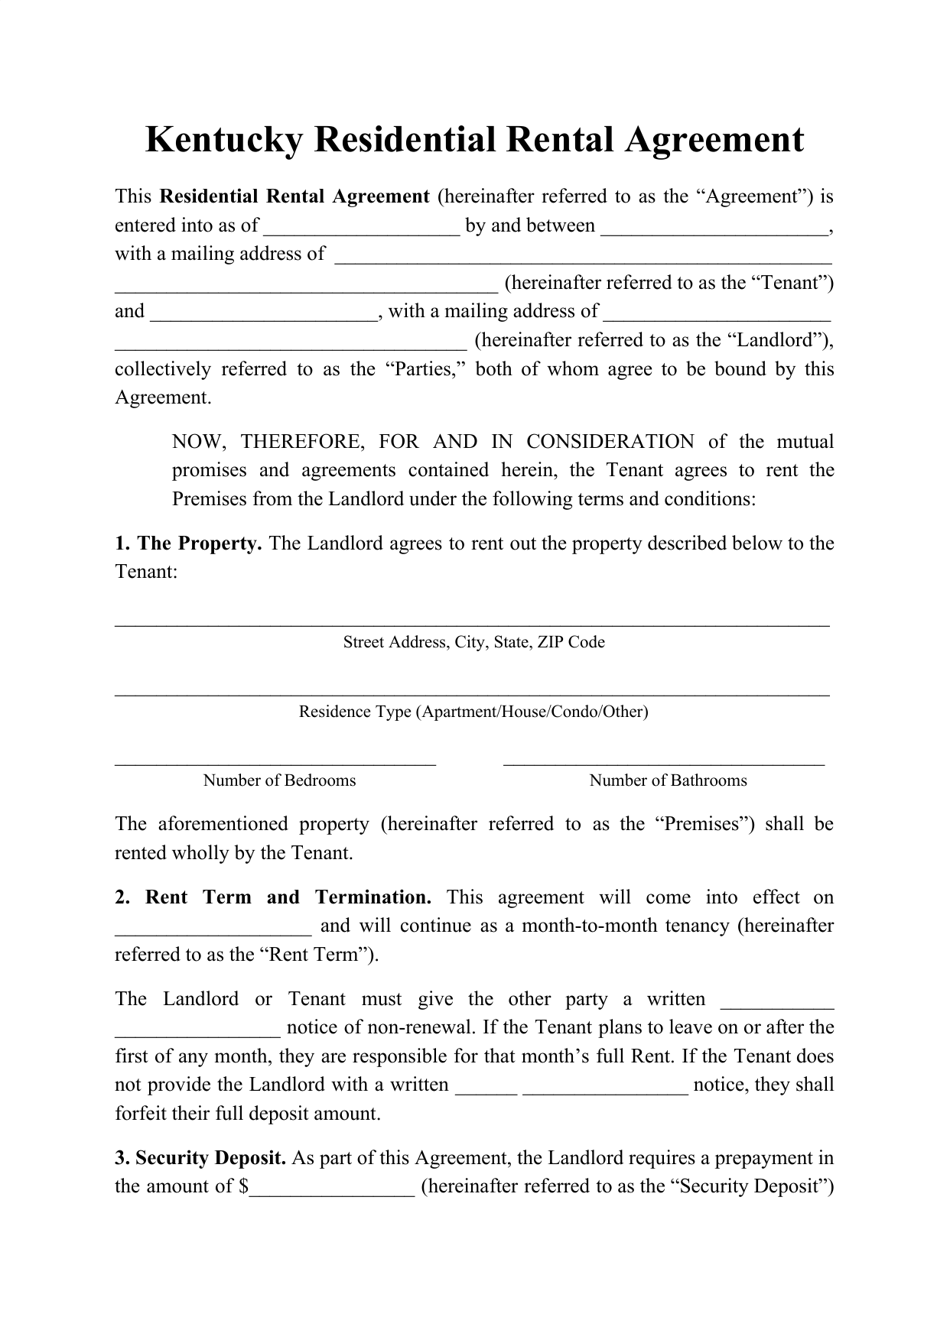 Residential Rental Agreement Template - Kentucky, Page 1